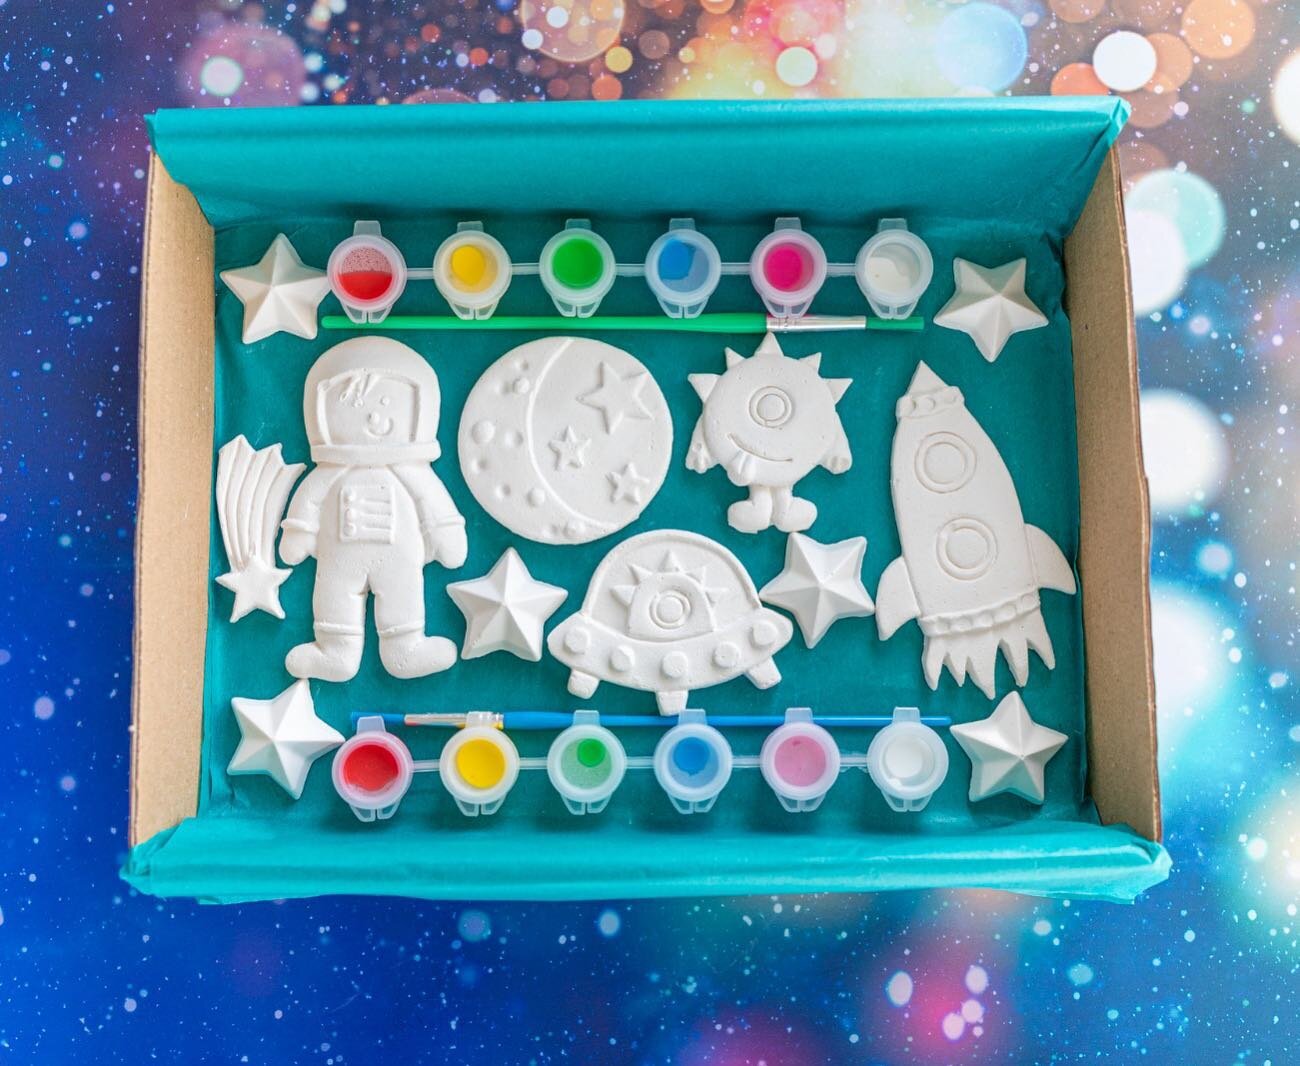 WE HAVE LIFT OFF! 

The NEW Space Boredom Box has officially launched 🚀 

There&rsquo;s been lots of messages asking when this was happening so I&rsquo;m super excited for this theme.

#space #spacegirl #spaceboy #galaxy #intergalactic #nasa #nasa🚀